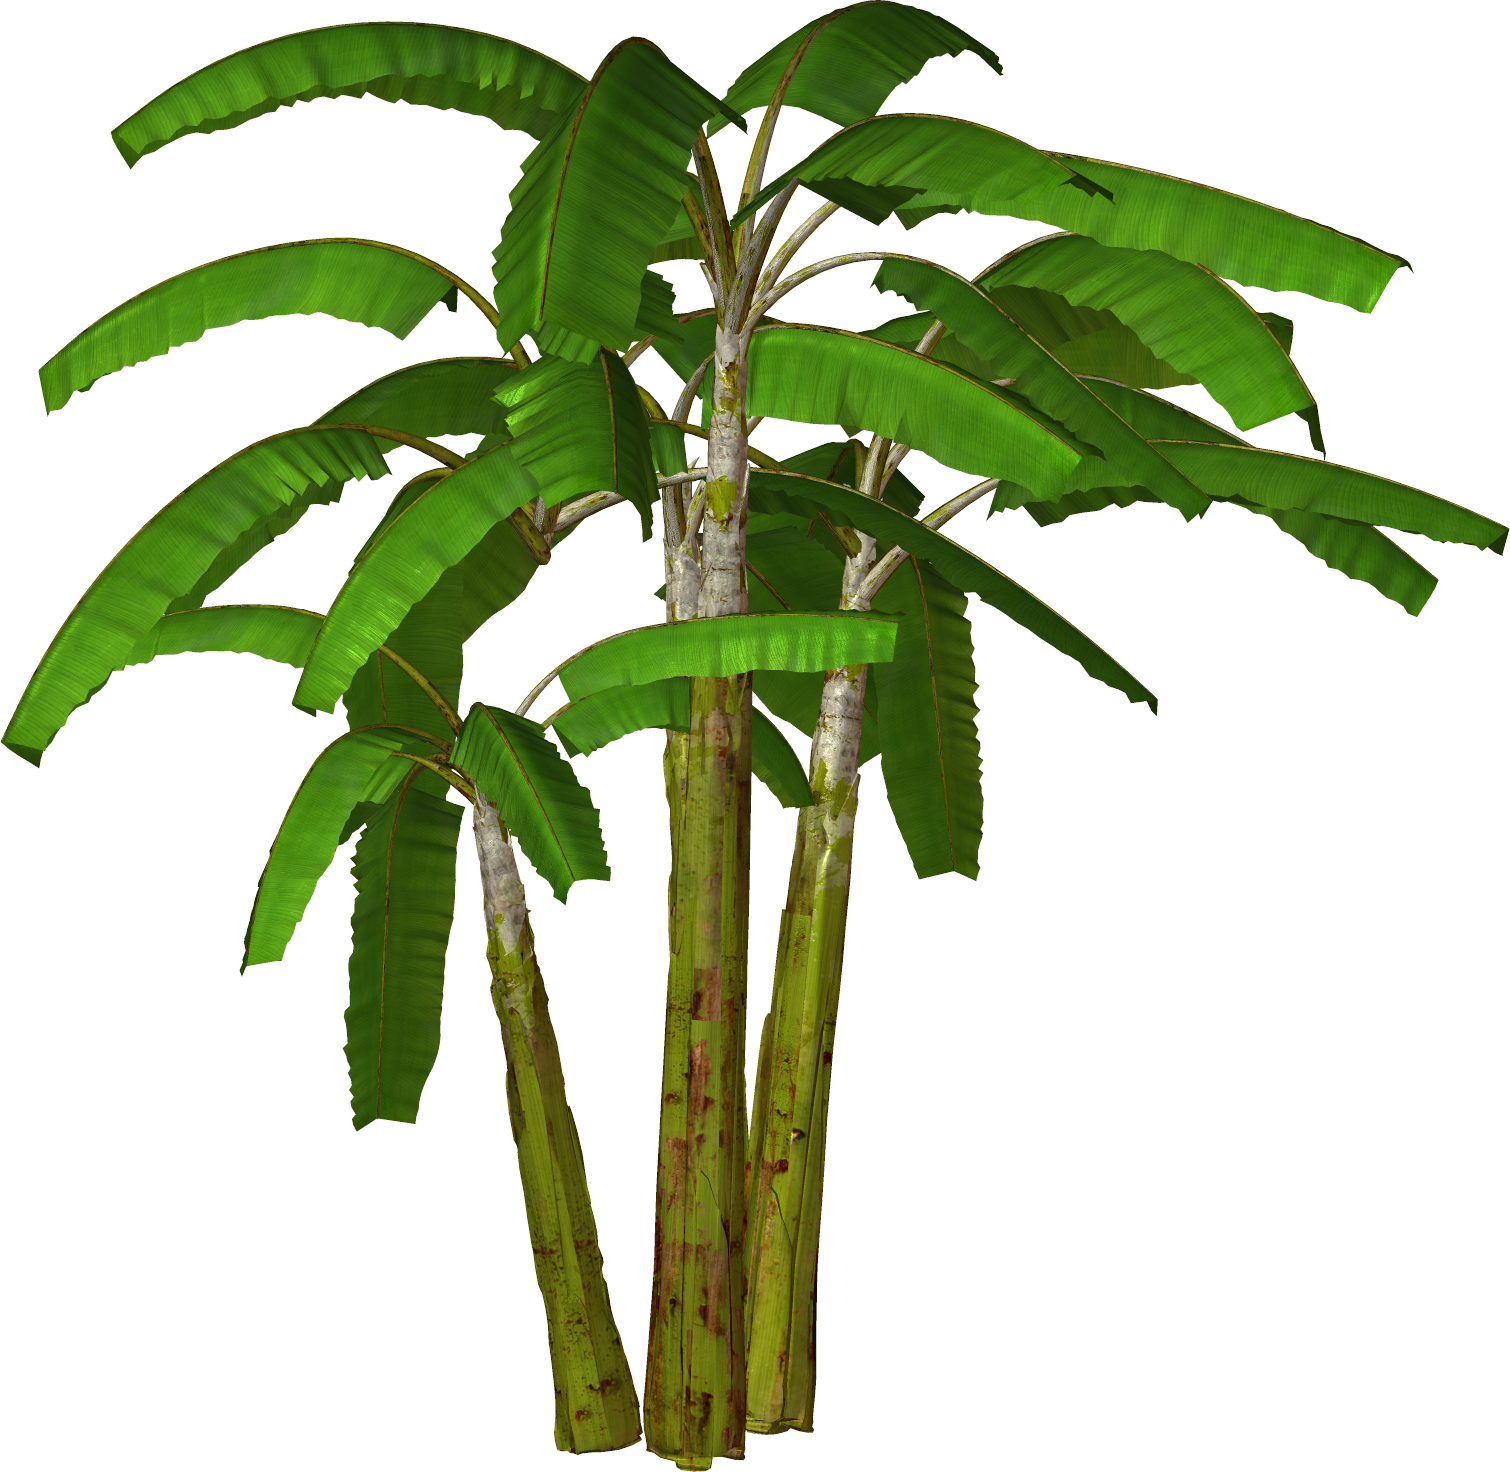 Free High Resolution Graphics And Clip Art - Banana Tree Images In Hd (1510x1472)